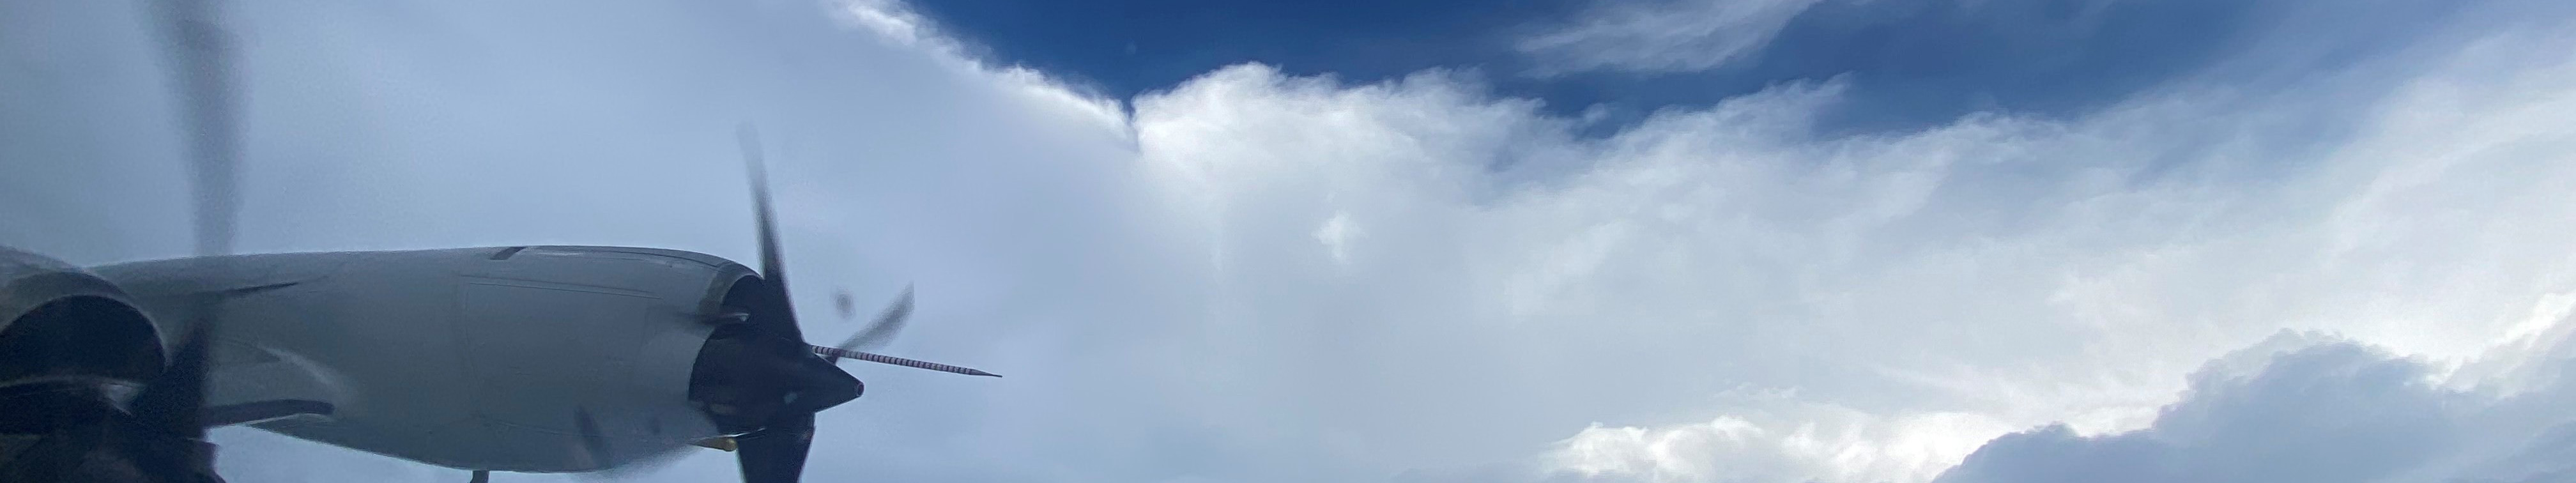 A view of an airplane inside of a hurricane cloud. The curve of the eye wall is visible and there is blue sky above the cloud.